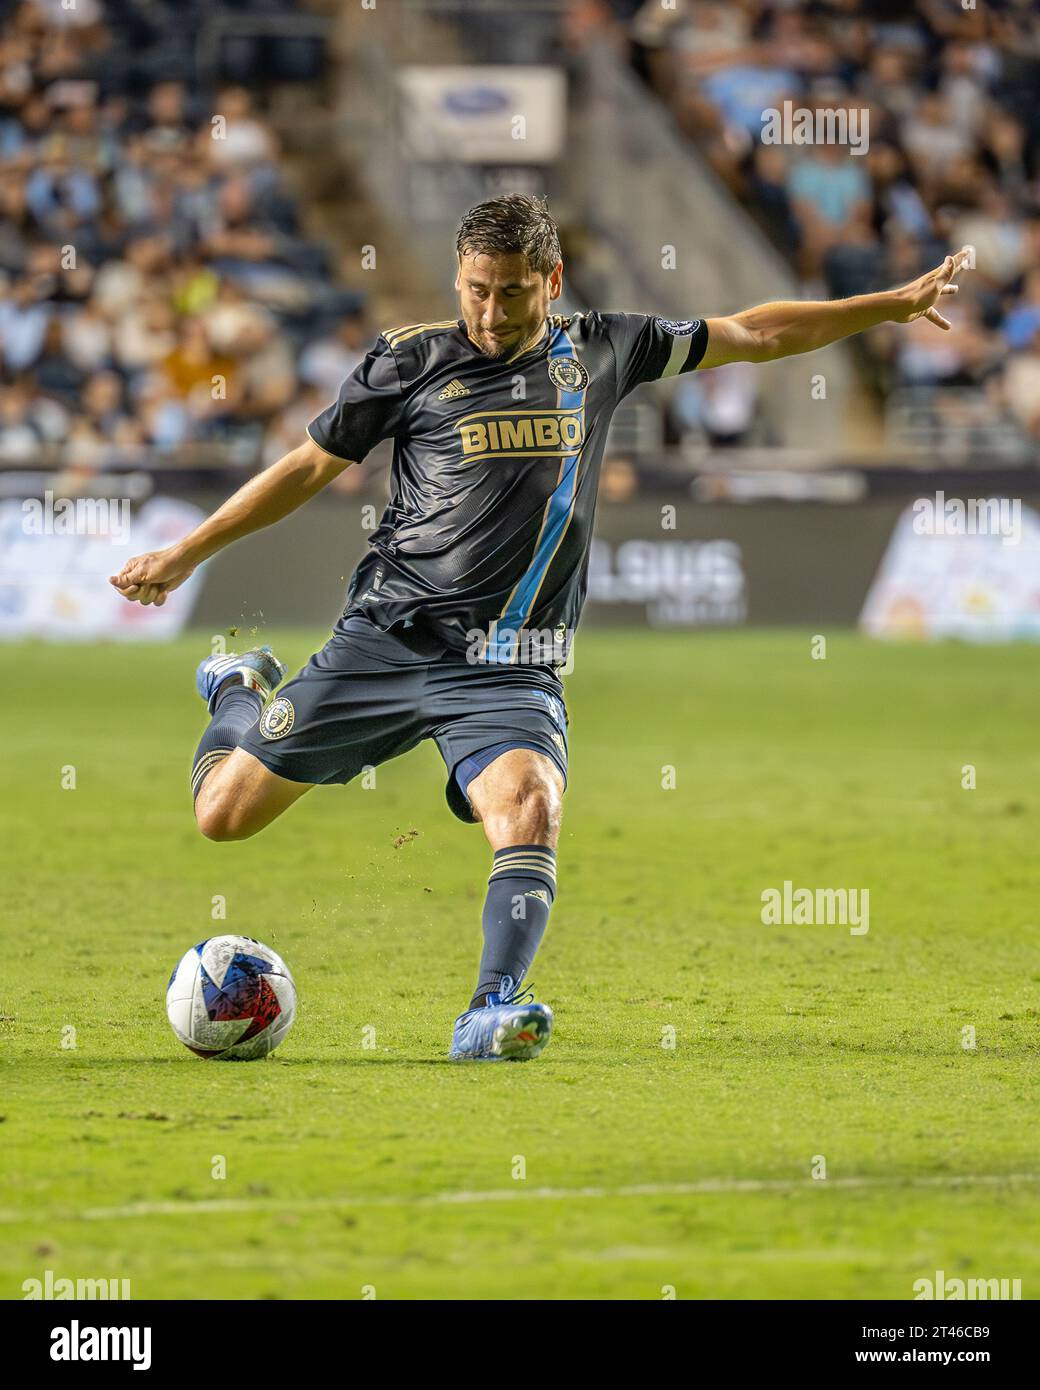 Alejandro Bedoya shoots the ball during an MLS match versus the New England Revolution - Major League Soccer footballers playing on the pitch in the USA / United States Credit: Don Mennig / Alamy News Stock Photo